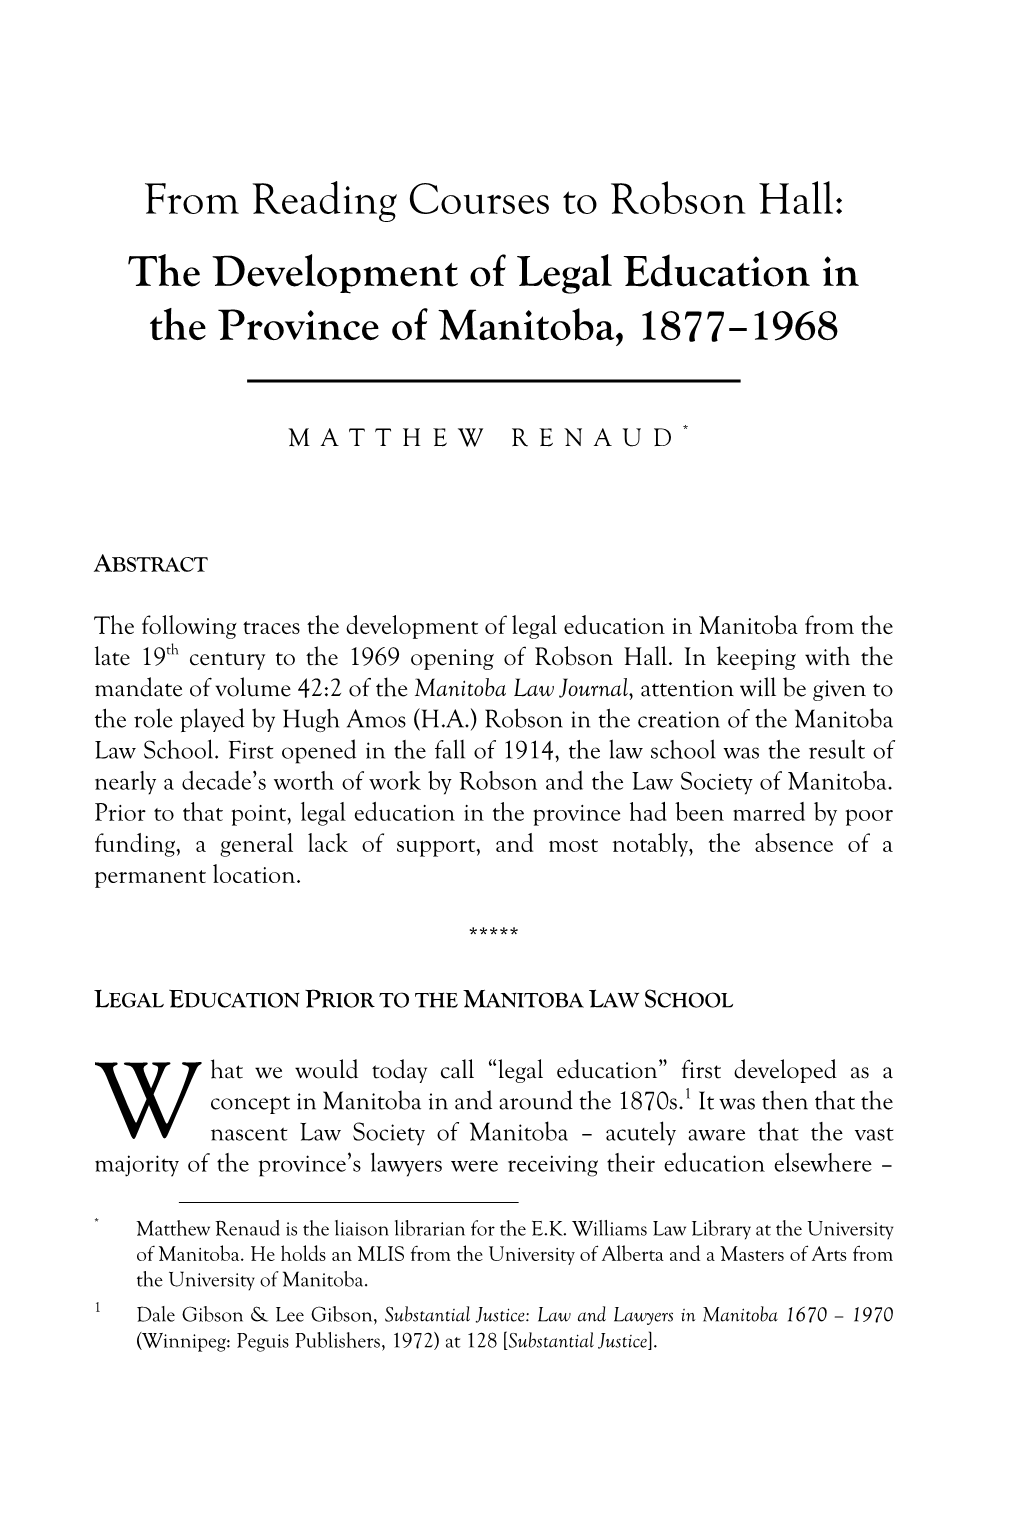 From Reading Courses to Robson Hall: the Development of Legal Education in the Province of Manitoba, 1877–1968